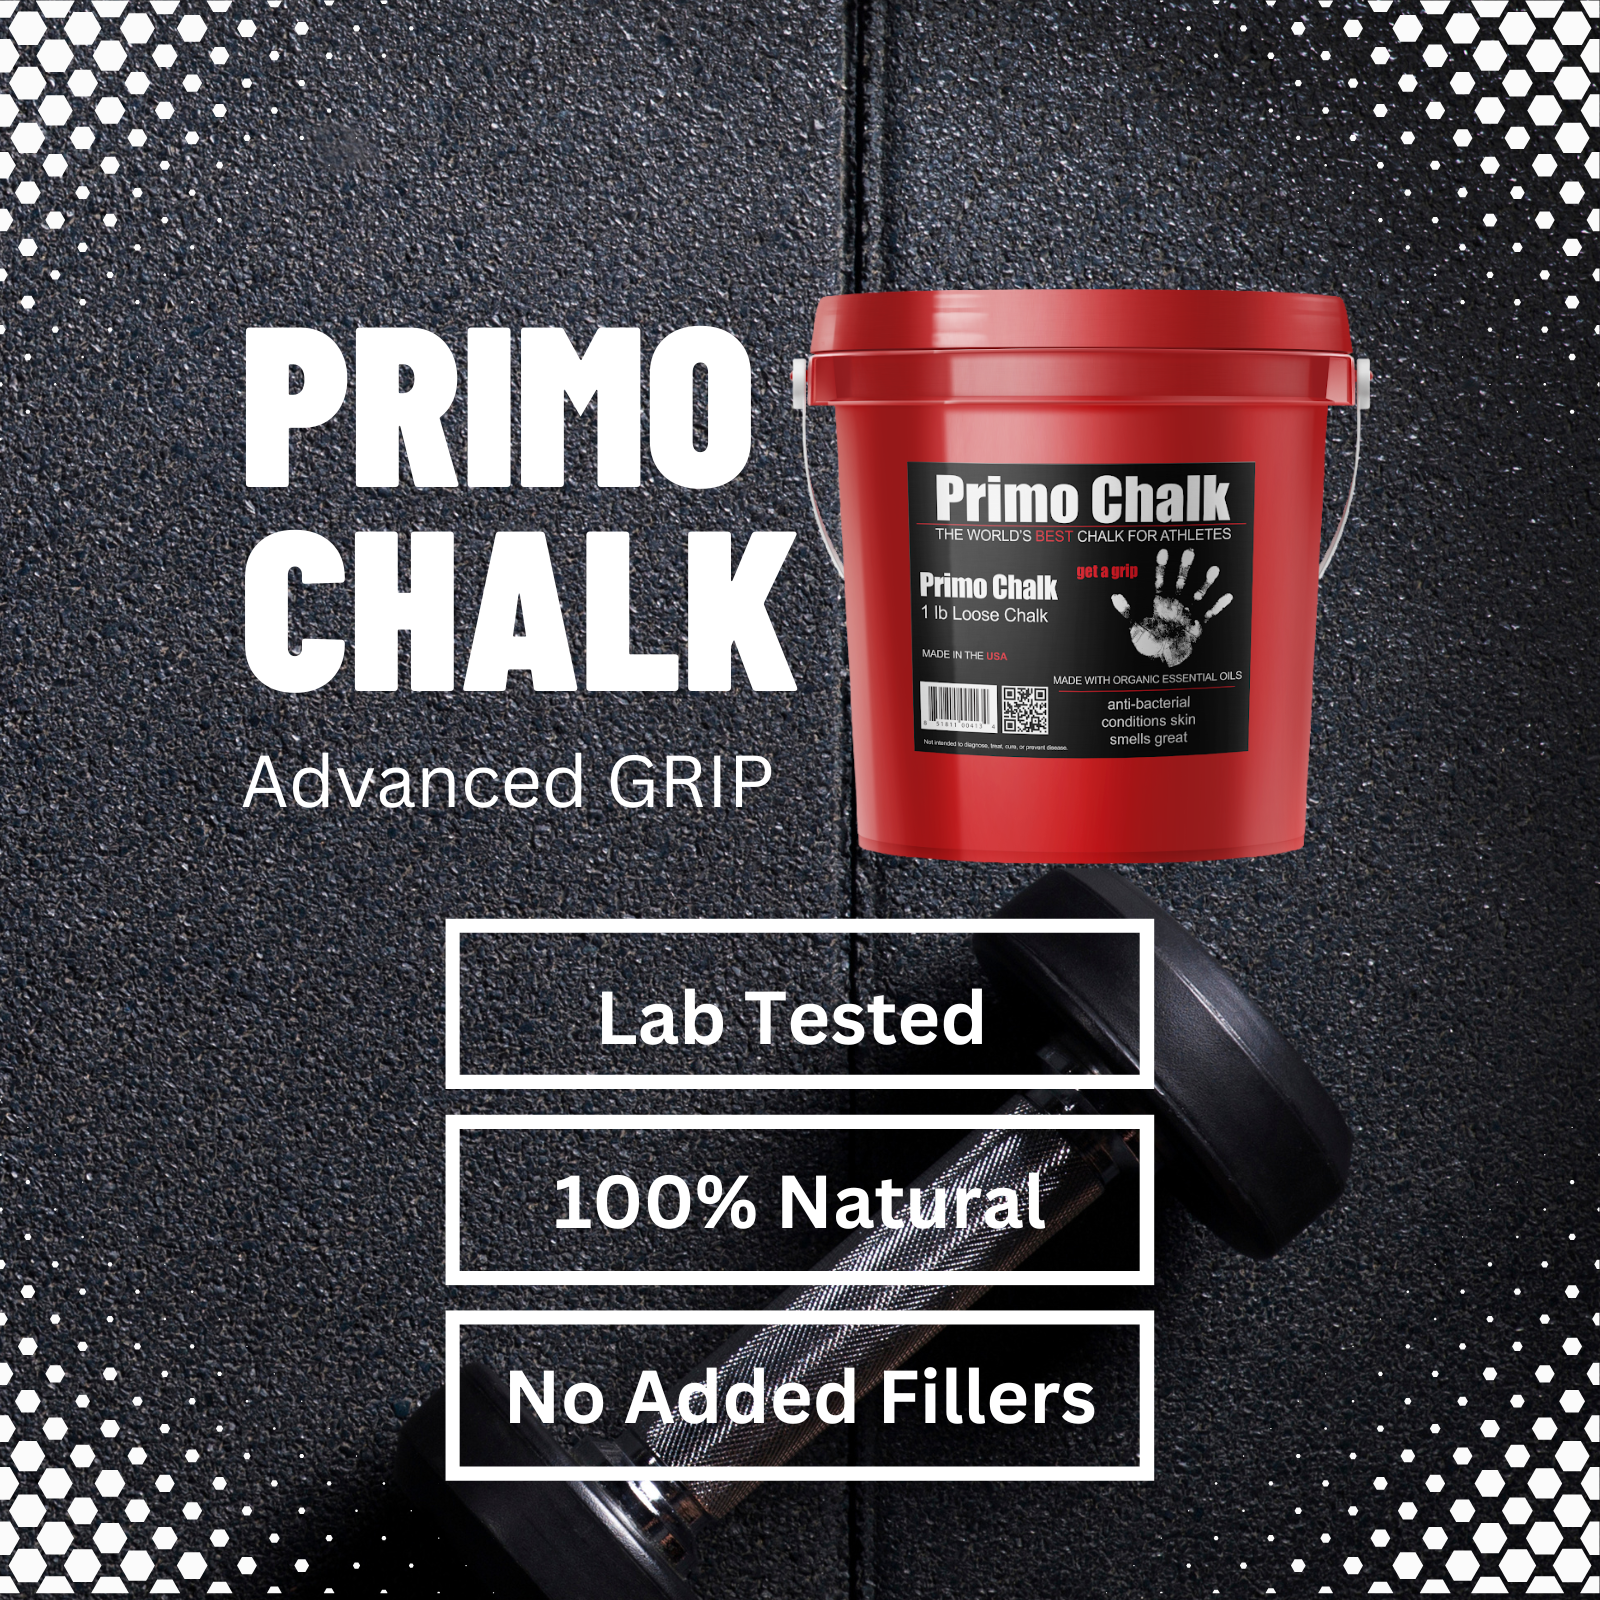 Behind the Scenes of Primo Chalk